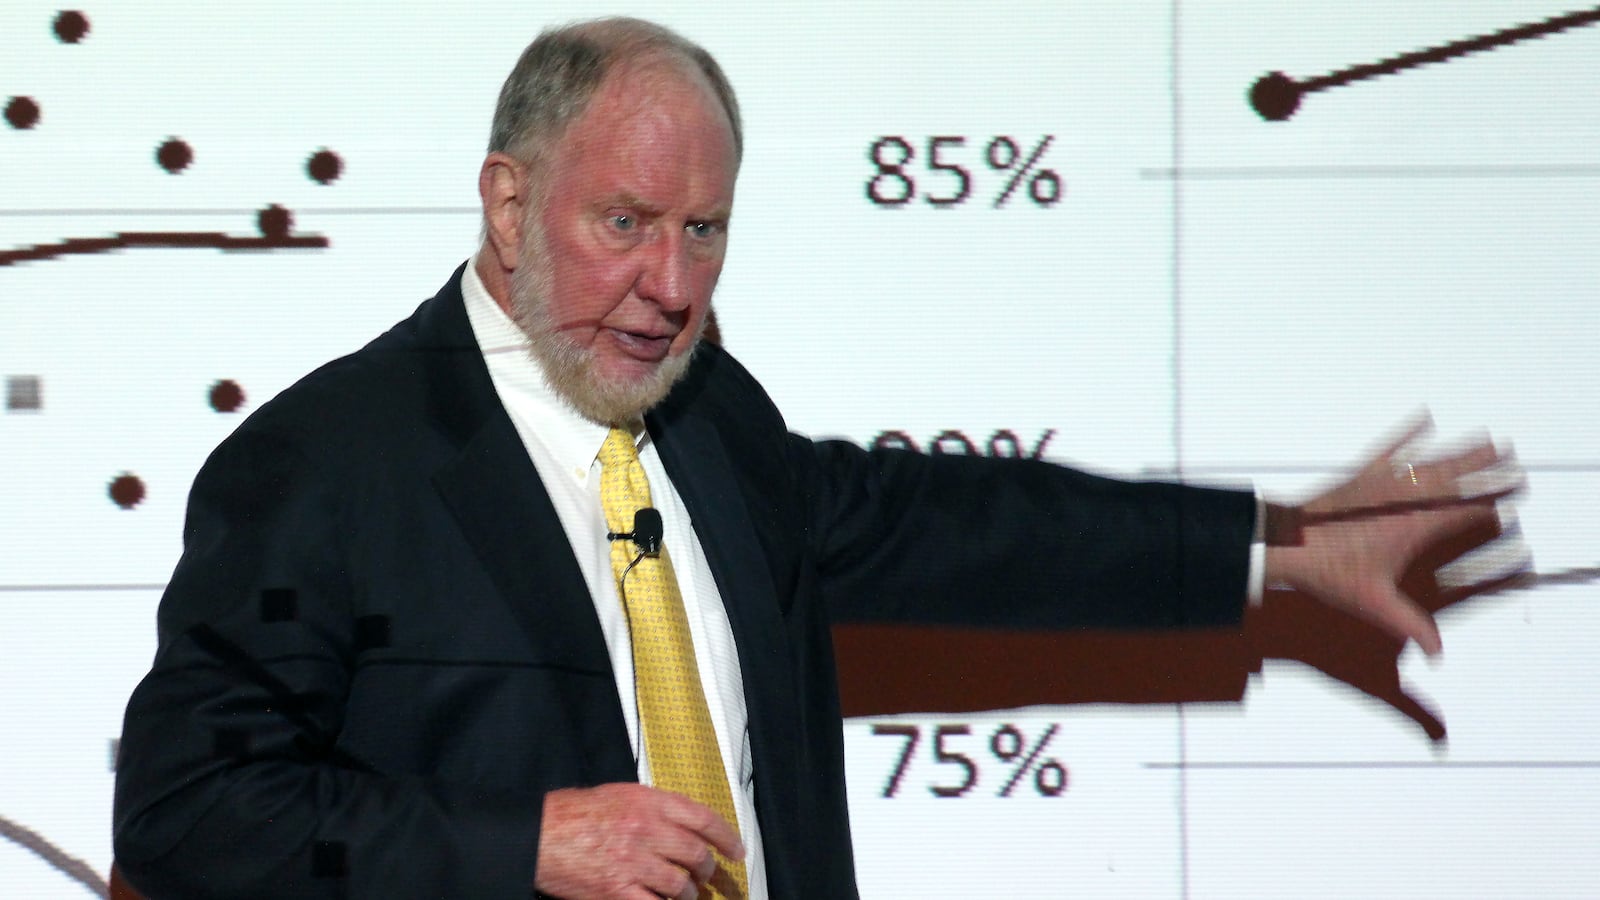 Harvard professor and author Robert Putnam discusses the opportunity gap that exists between the rich and the poor. Putnam gave a lecture on his most recent book, "Our Kids: The American Dream in Crisis," at the Denver Museum of Nature and Science Wednesday evening.